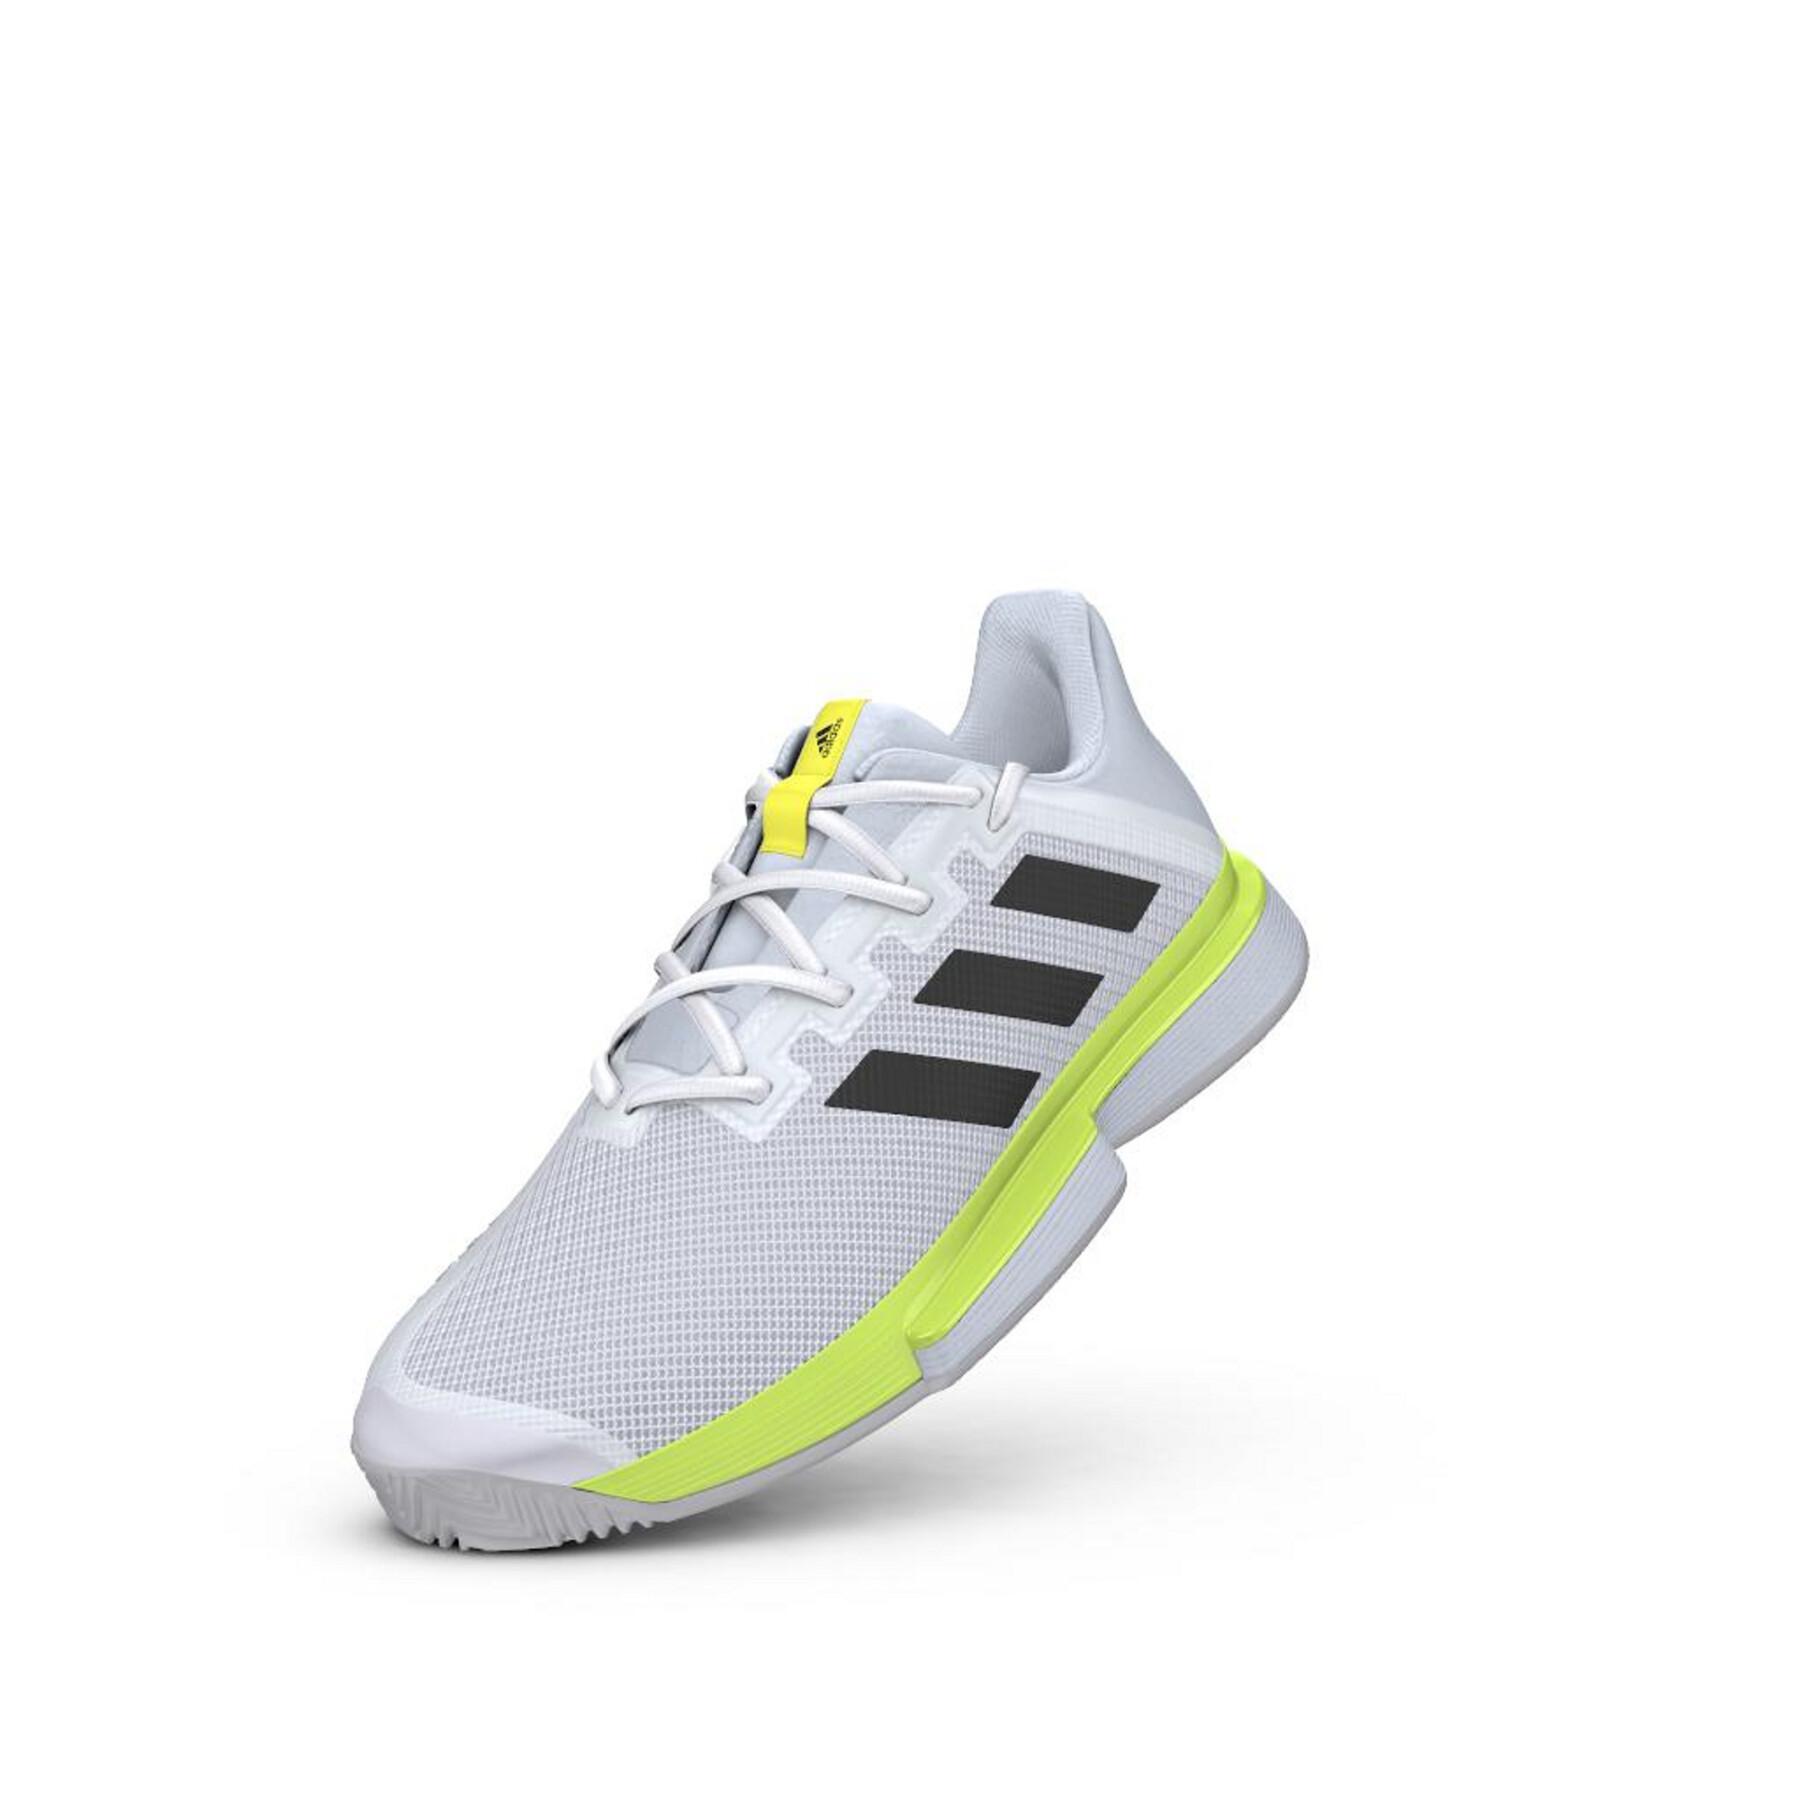 Chaussures femme adidas Sole Match Bounce